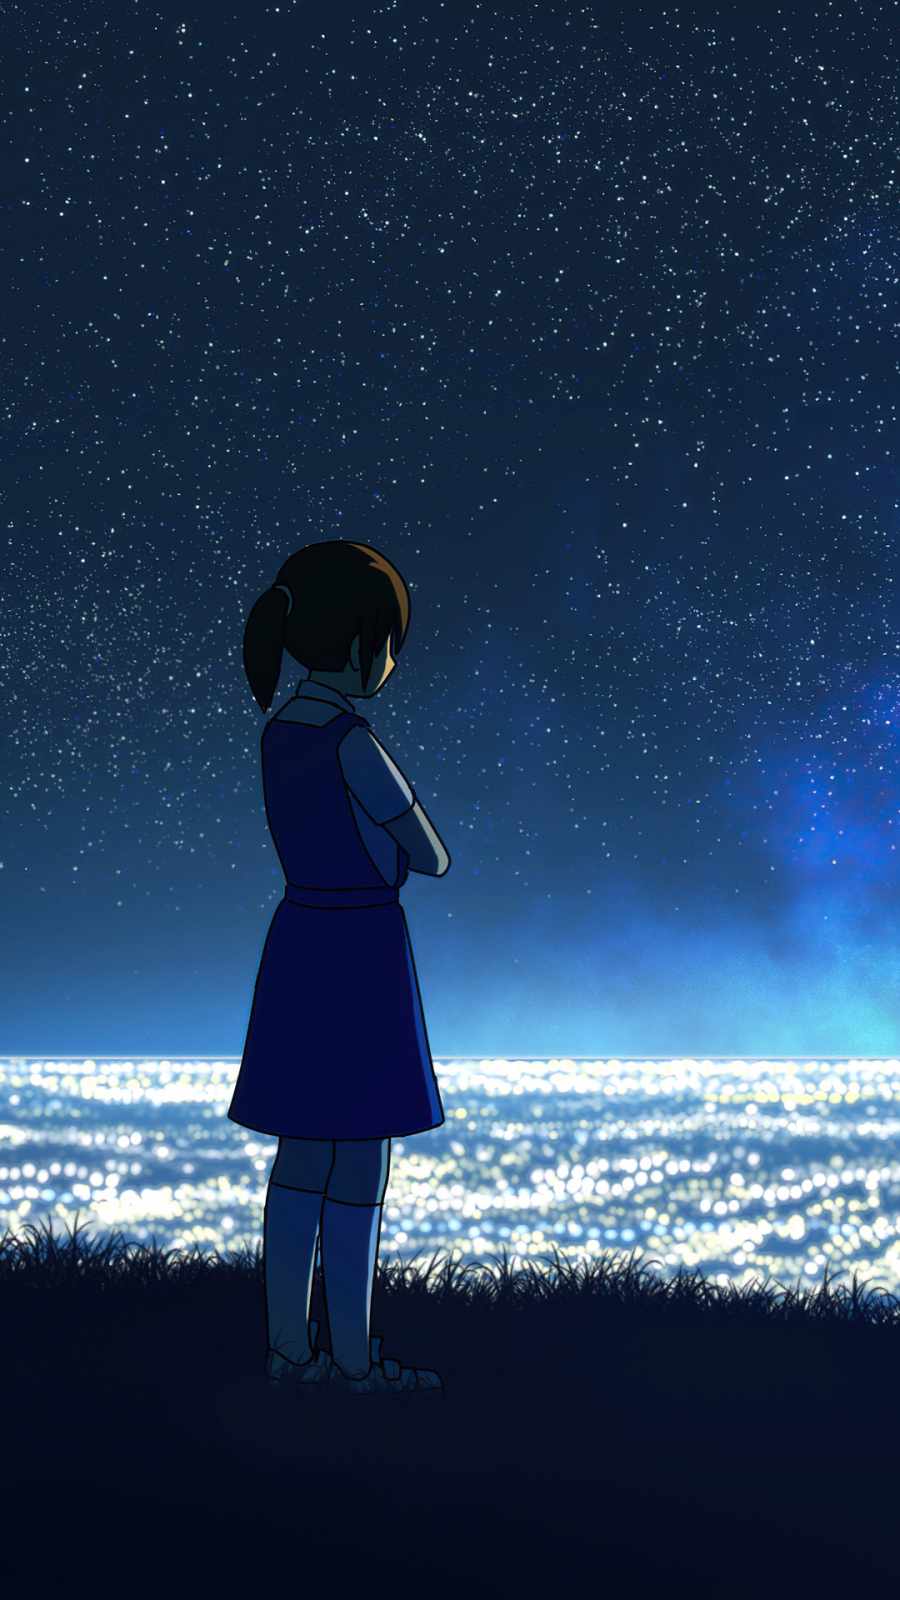 Anime Girl At Hilltop Seeing Cityscape - IPhone Wallpapers : iPhone  Wallpapers